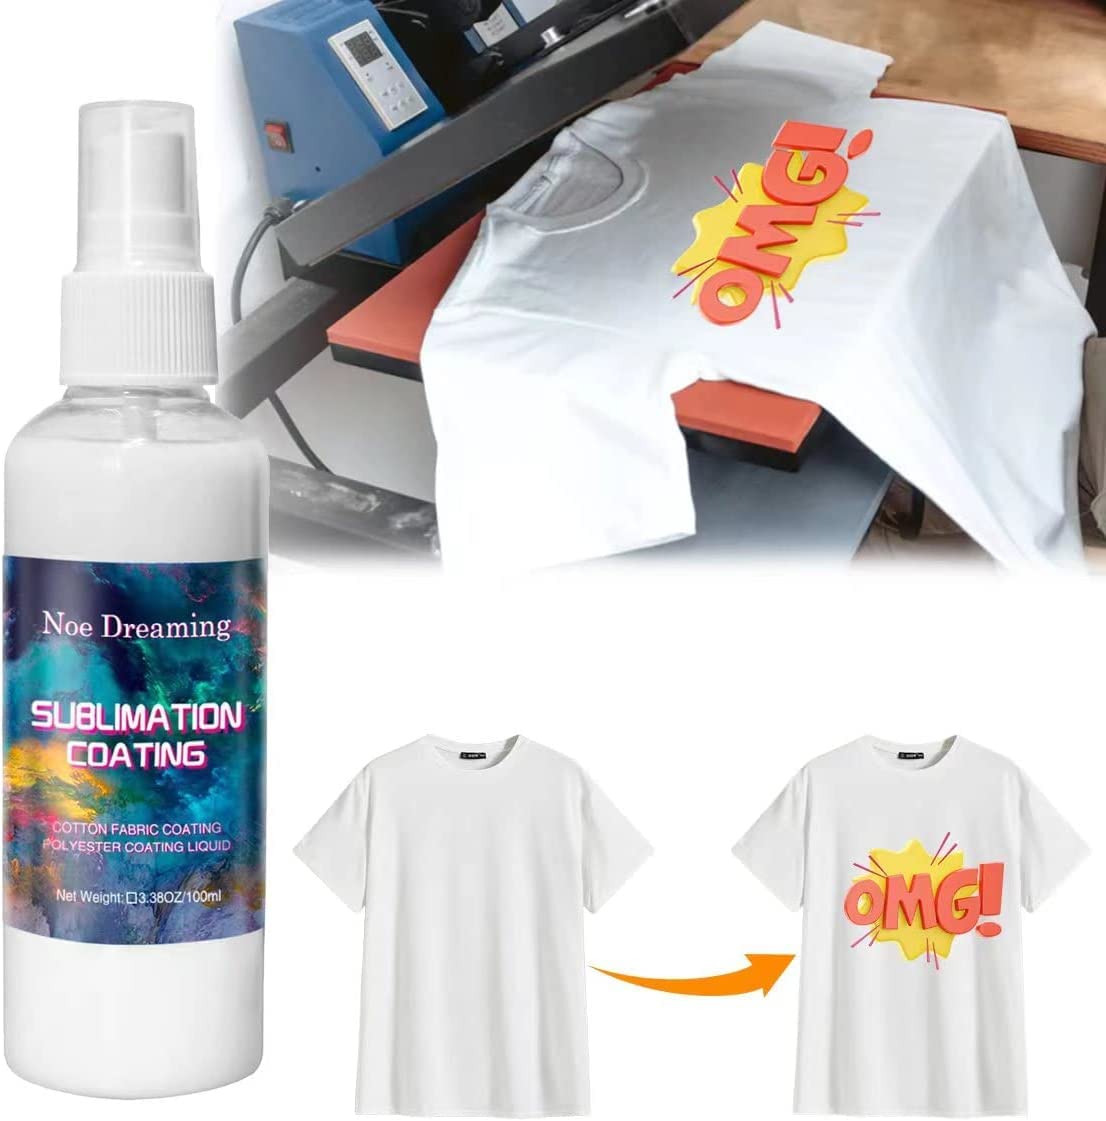 Subli+Mate Sublimation Spray Concentrate + Empty Spray Bottle Kit